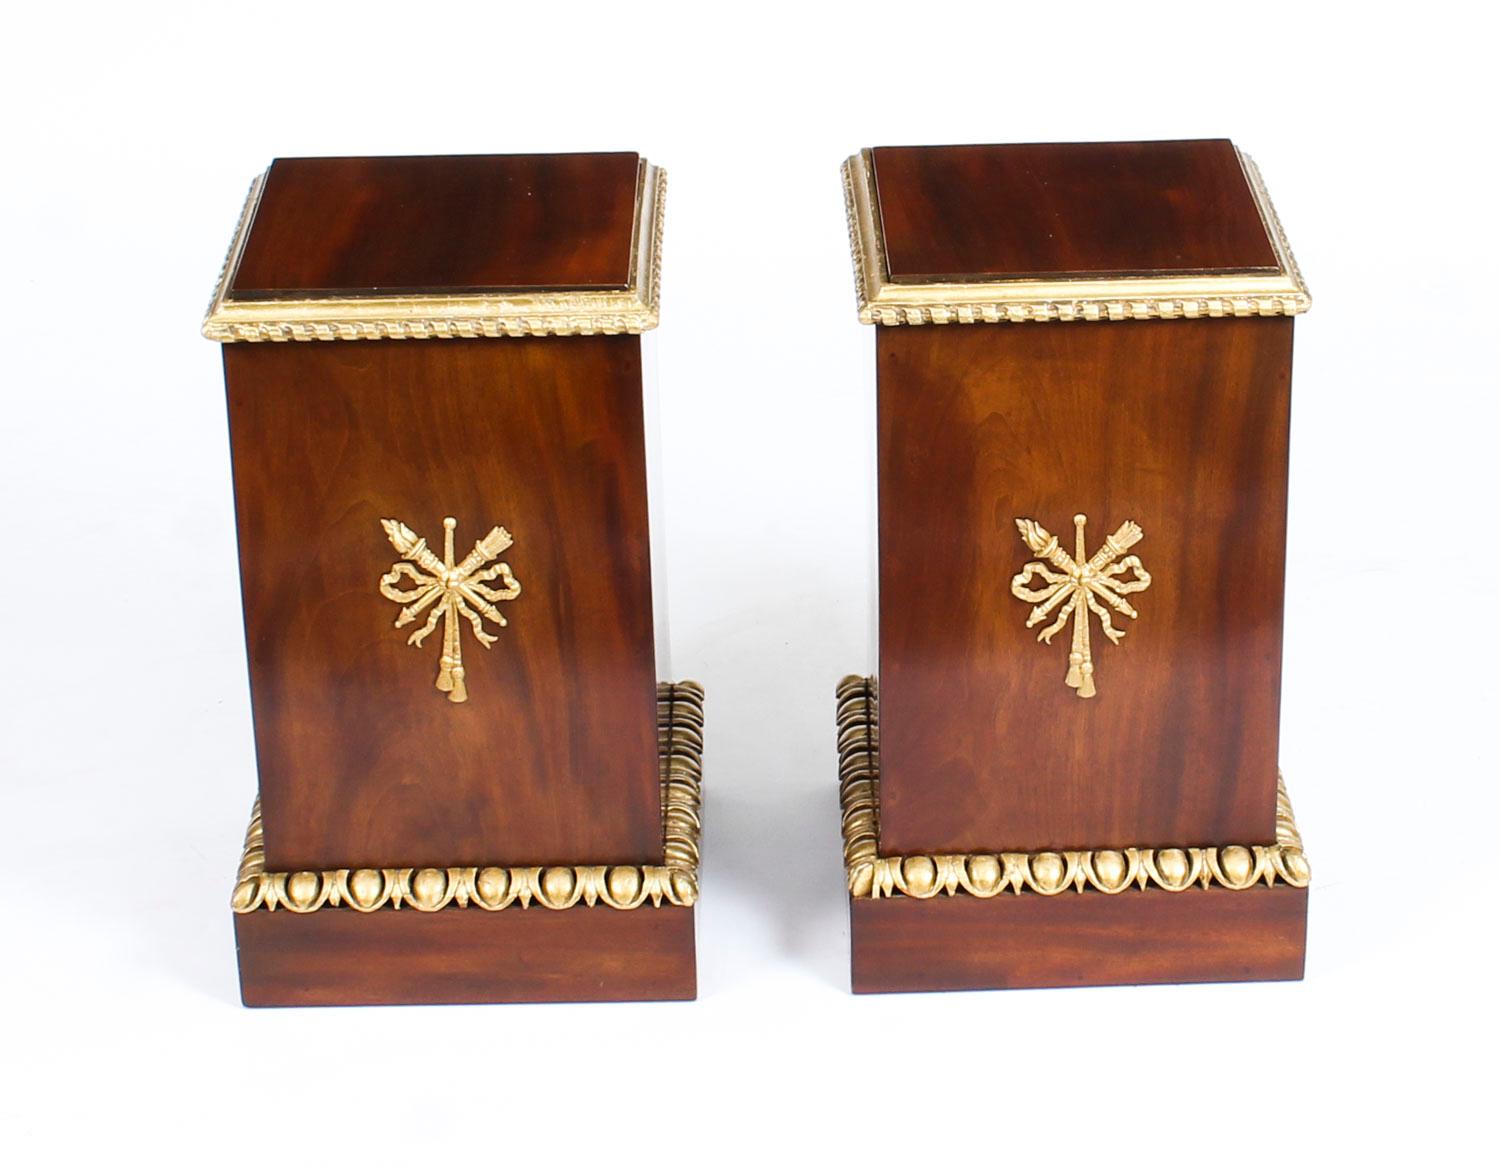 This is a gorgeous pair of antique George III Revival mahogany giltwood square pedestals s which date from the late 19th century.

The moulded tops with ribbon borders, the moulded bases with egg and tongue borders, the sides applied with ribbon